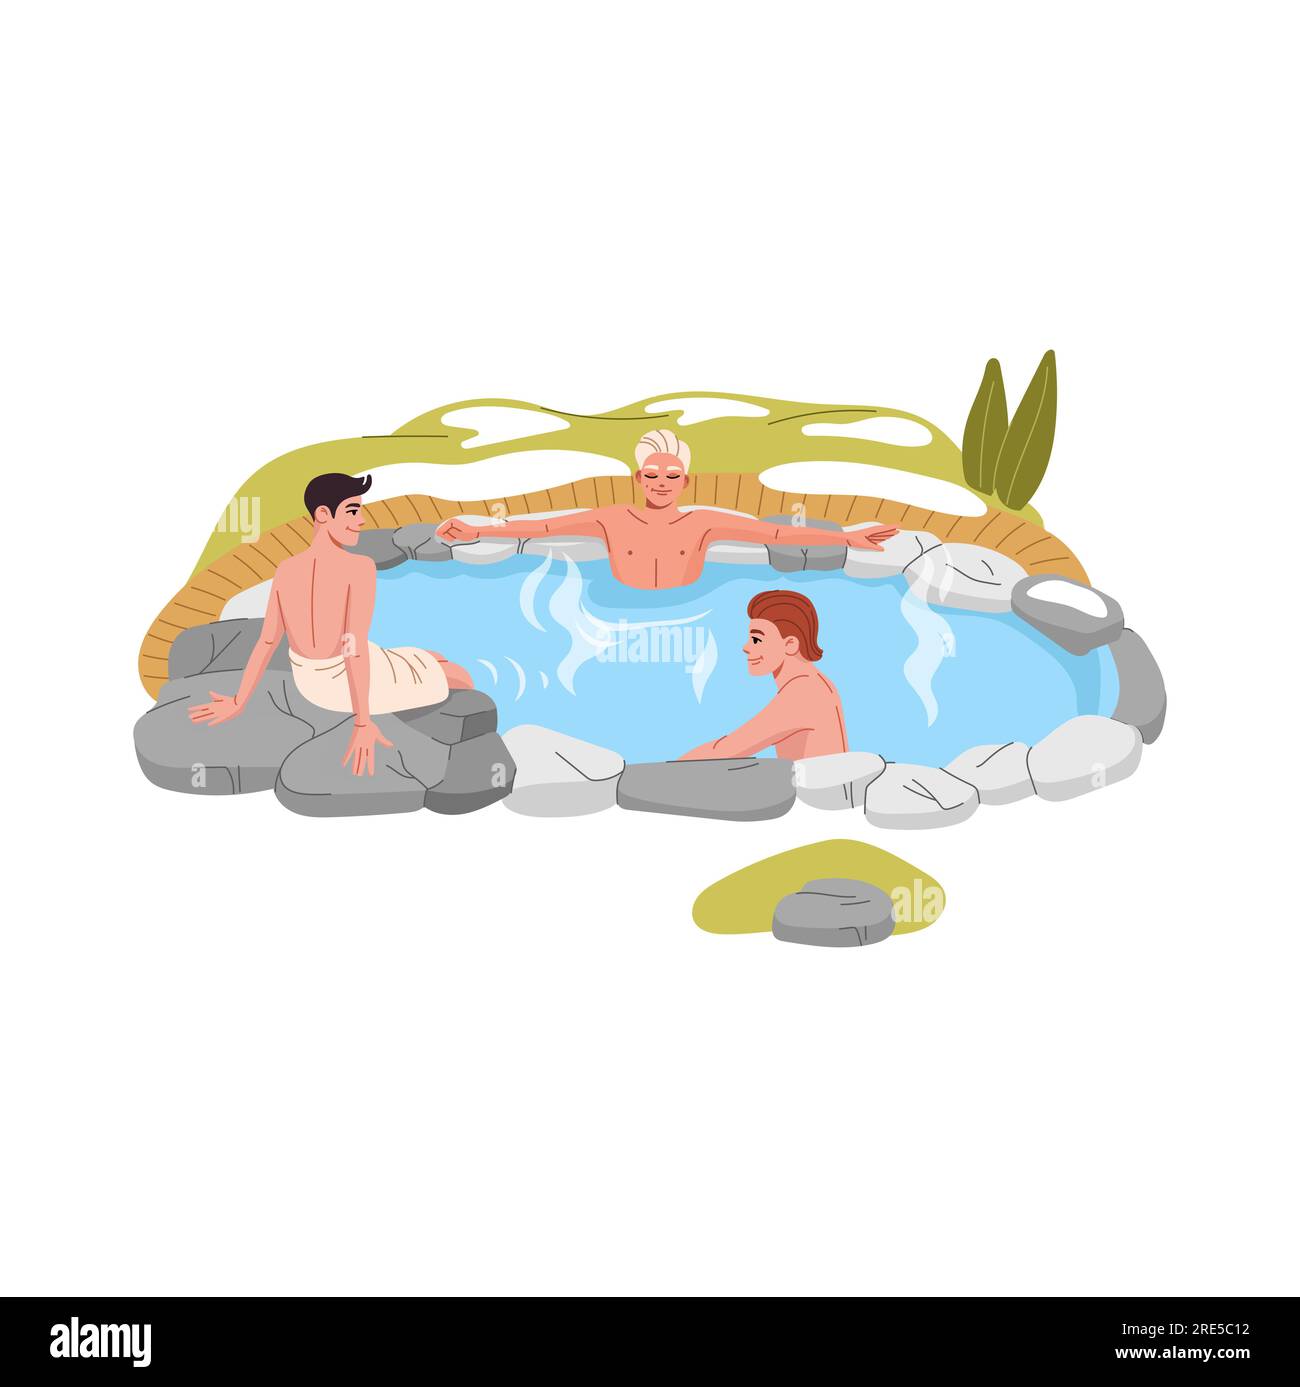 Japan onsen hot spring bath, cartoon young men relaxing in thermal pool with rocks, hot water and steam. Vector japanese spa bath tub, outdoor sauna winter pool of geothermal spring with wood pathway Stock Vector